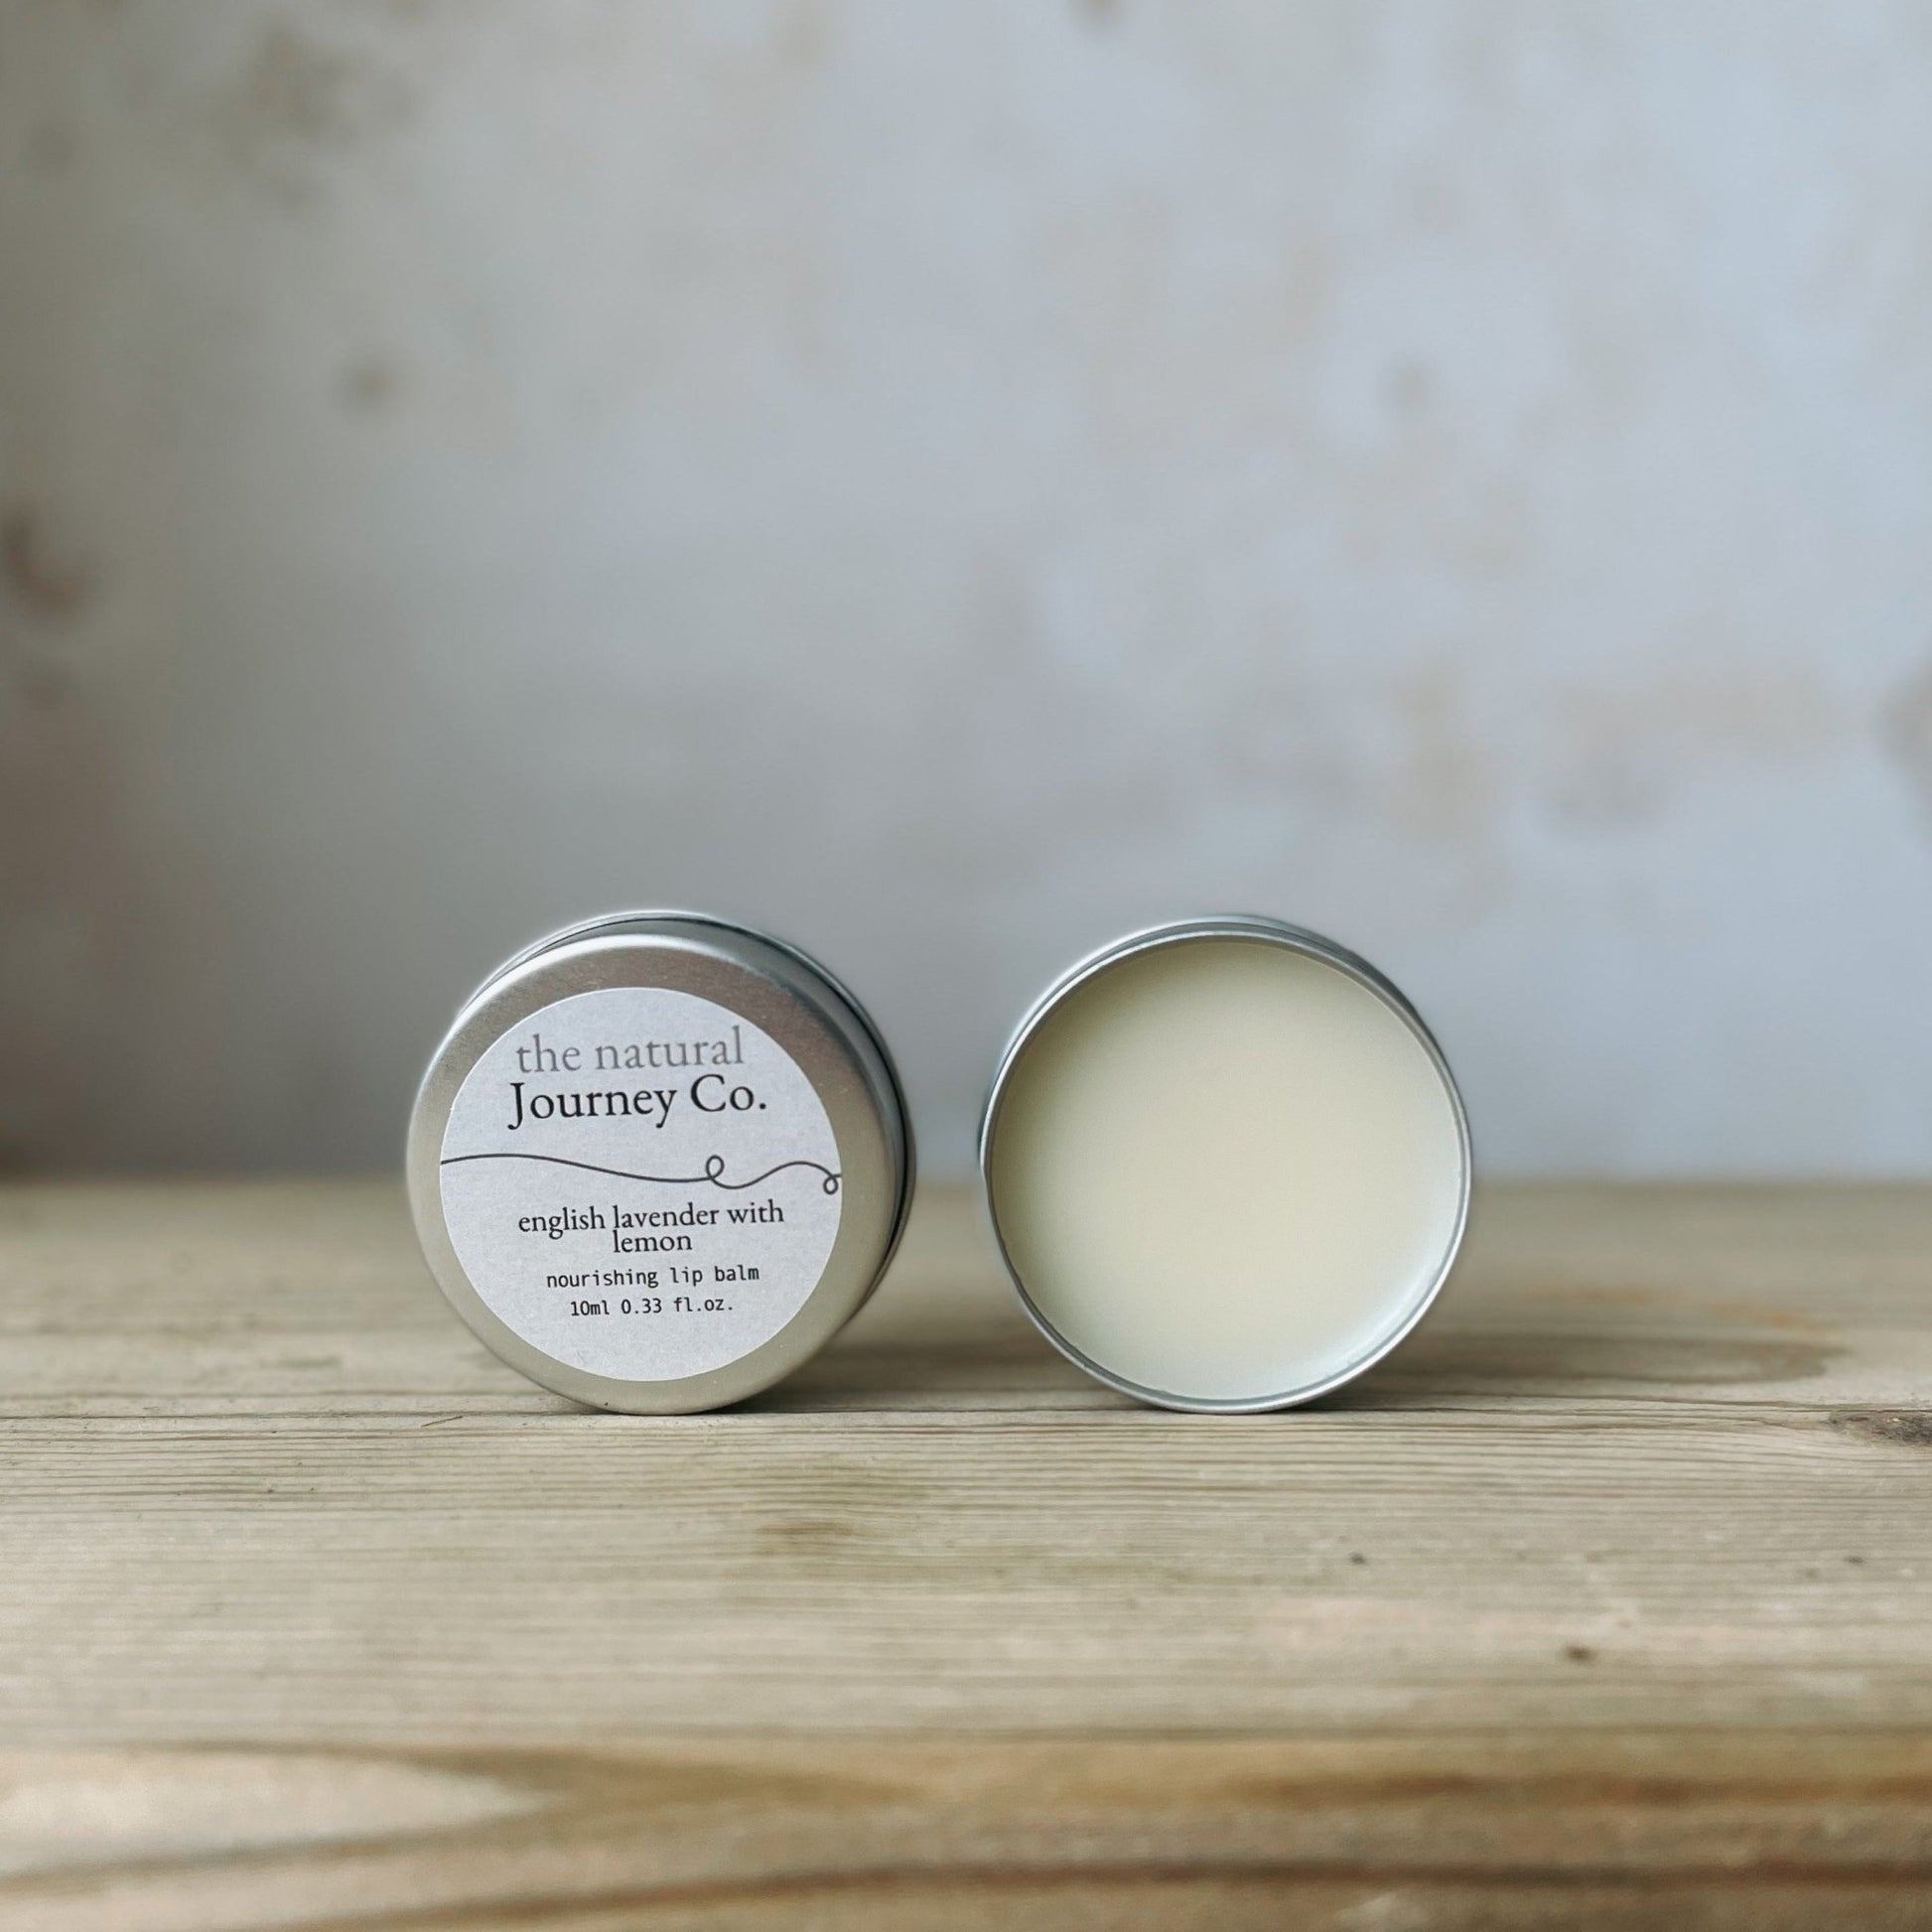 English Lavender with Lemon Lip Balm - The Natural Journey Company